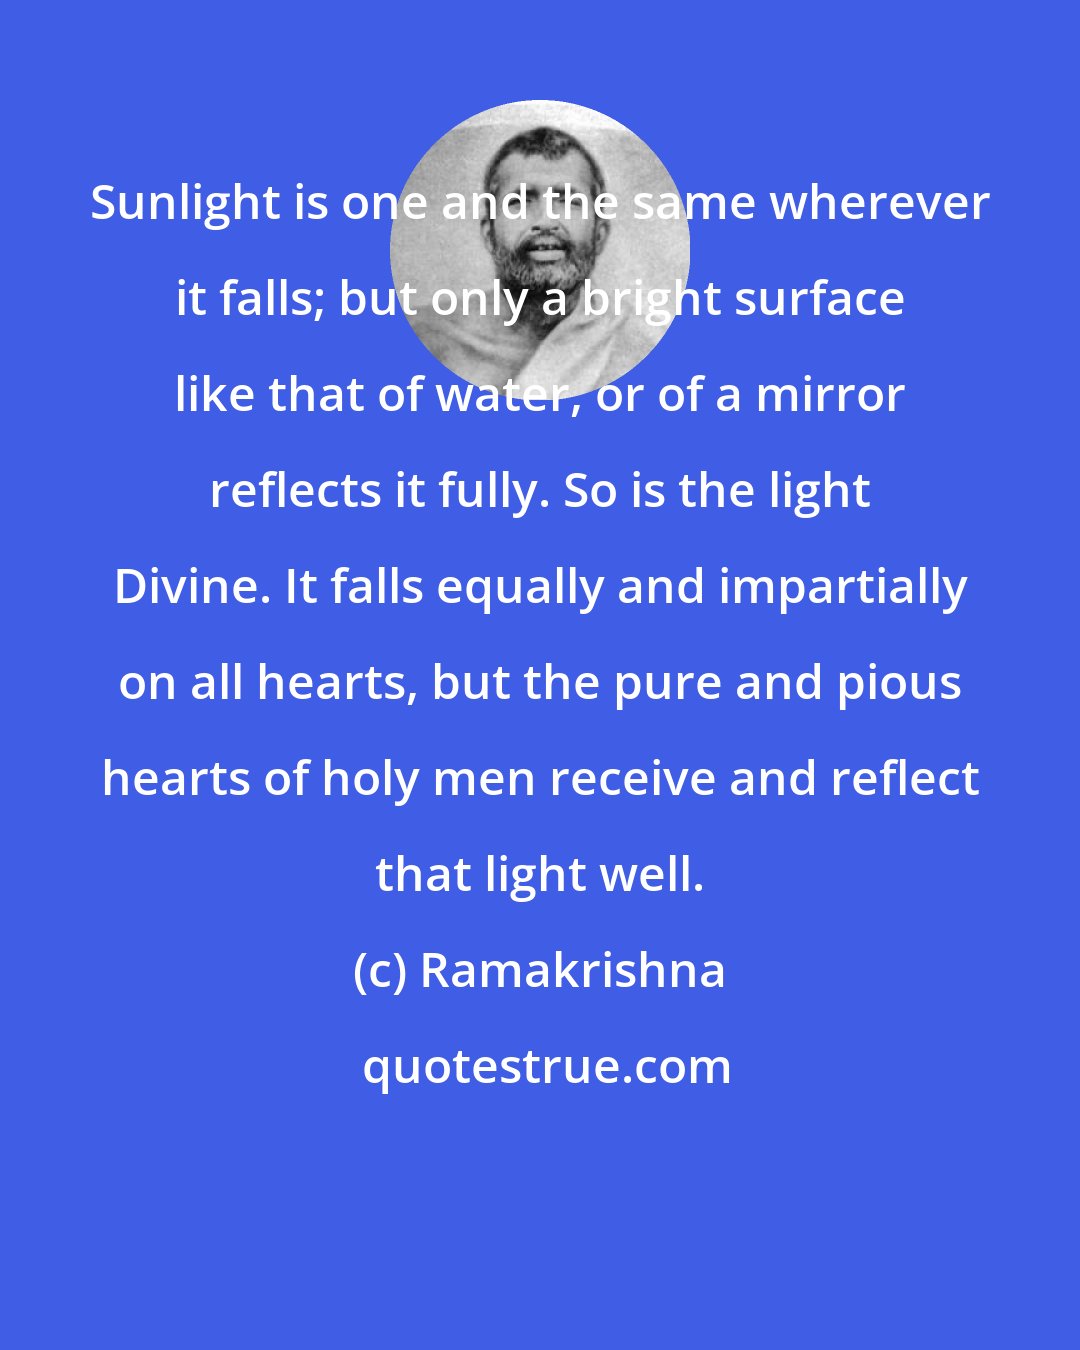 Ramakrishna: Sunlight is one and the same wherever it falls; but only a bright surface like that of water, or of a mirror reflects it fully. So is the light Divine. It falls equally and impartially on all hearts, but the pure and pious hearts of holy men receive and reflect that light well.